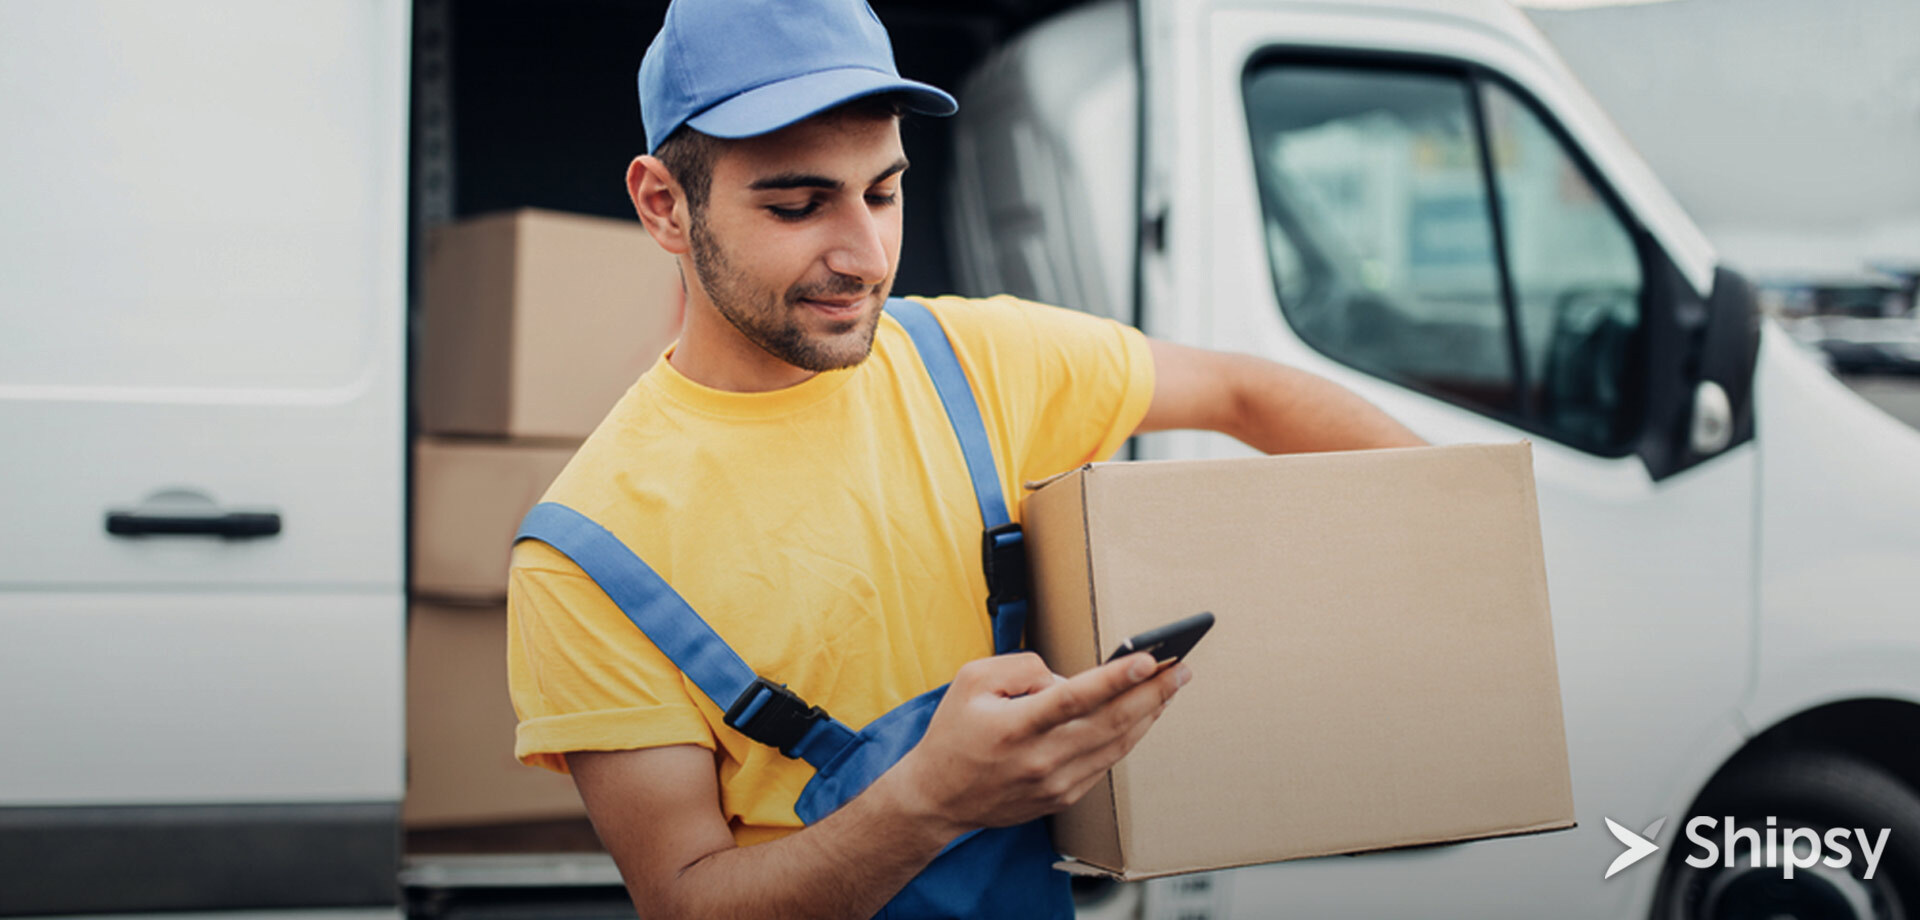 Looking for The Best Courier Company In UK? Here’s All You Need to Know